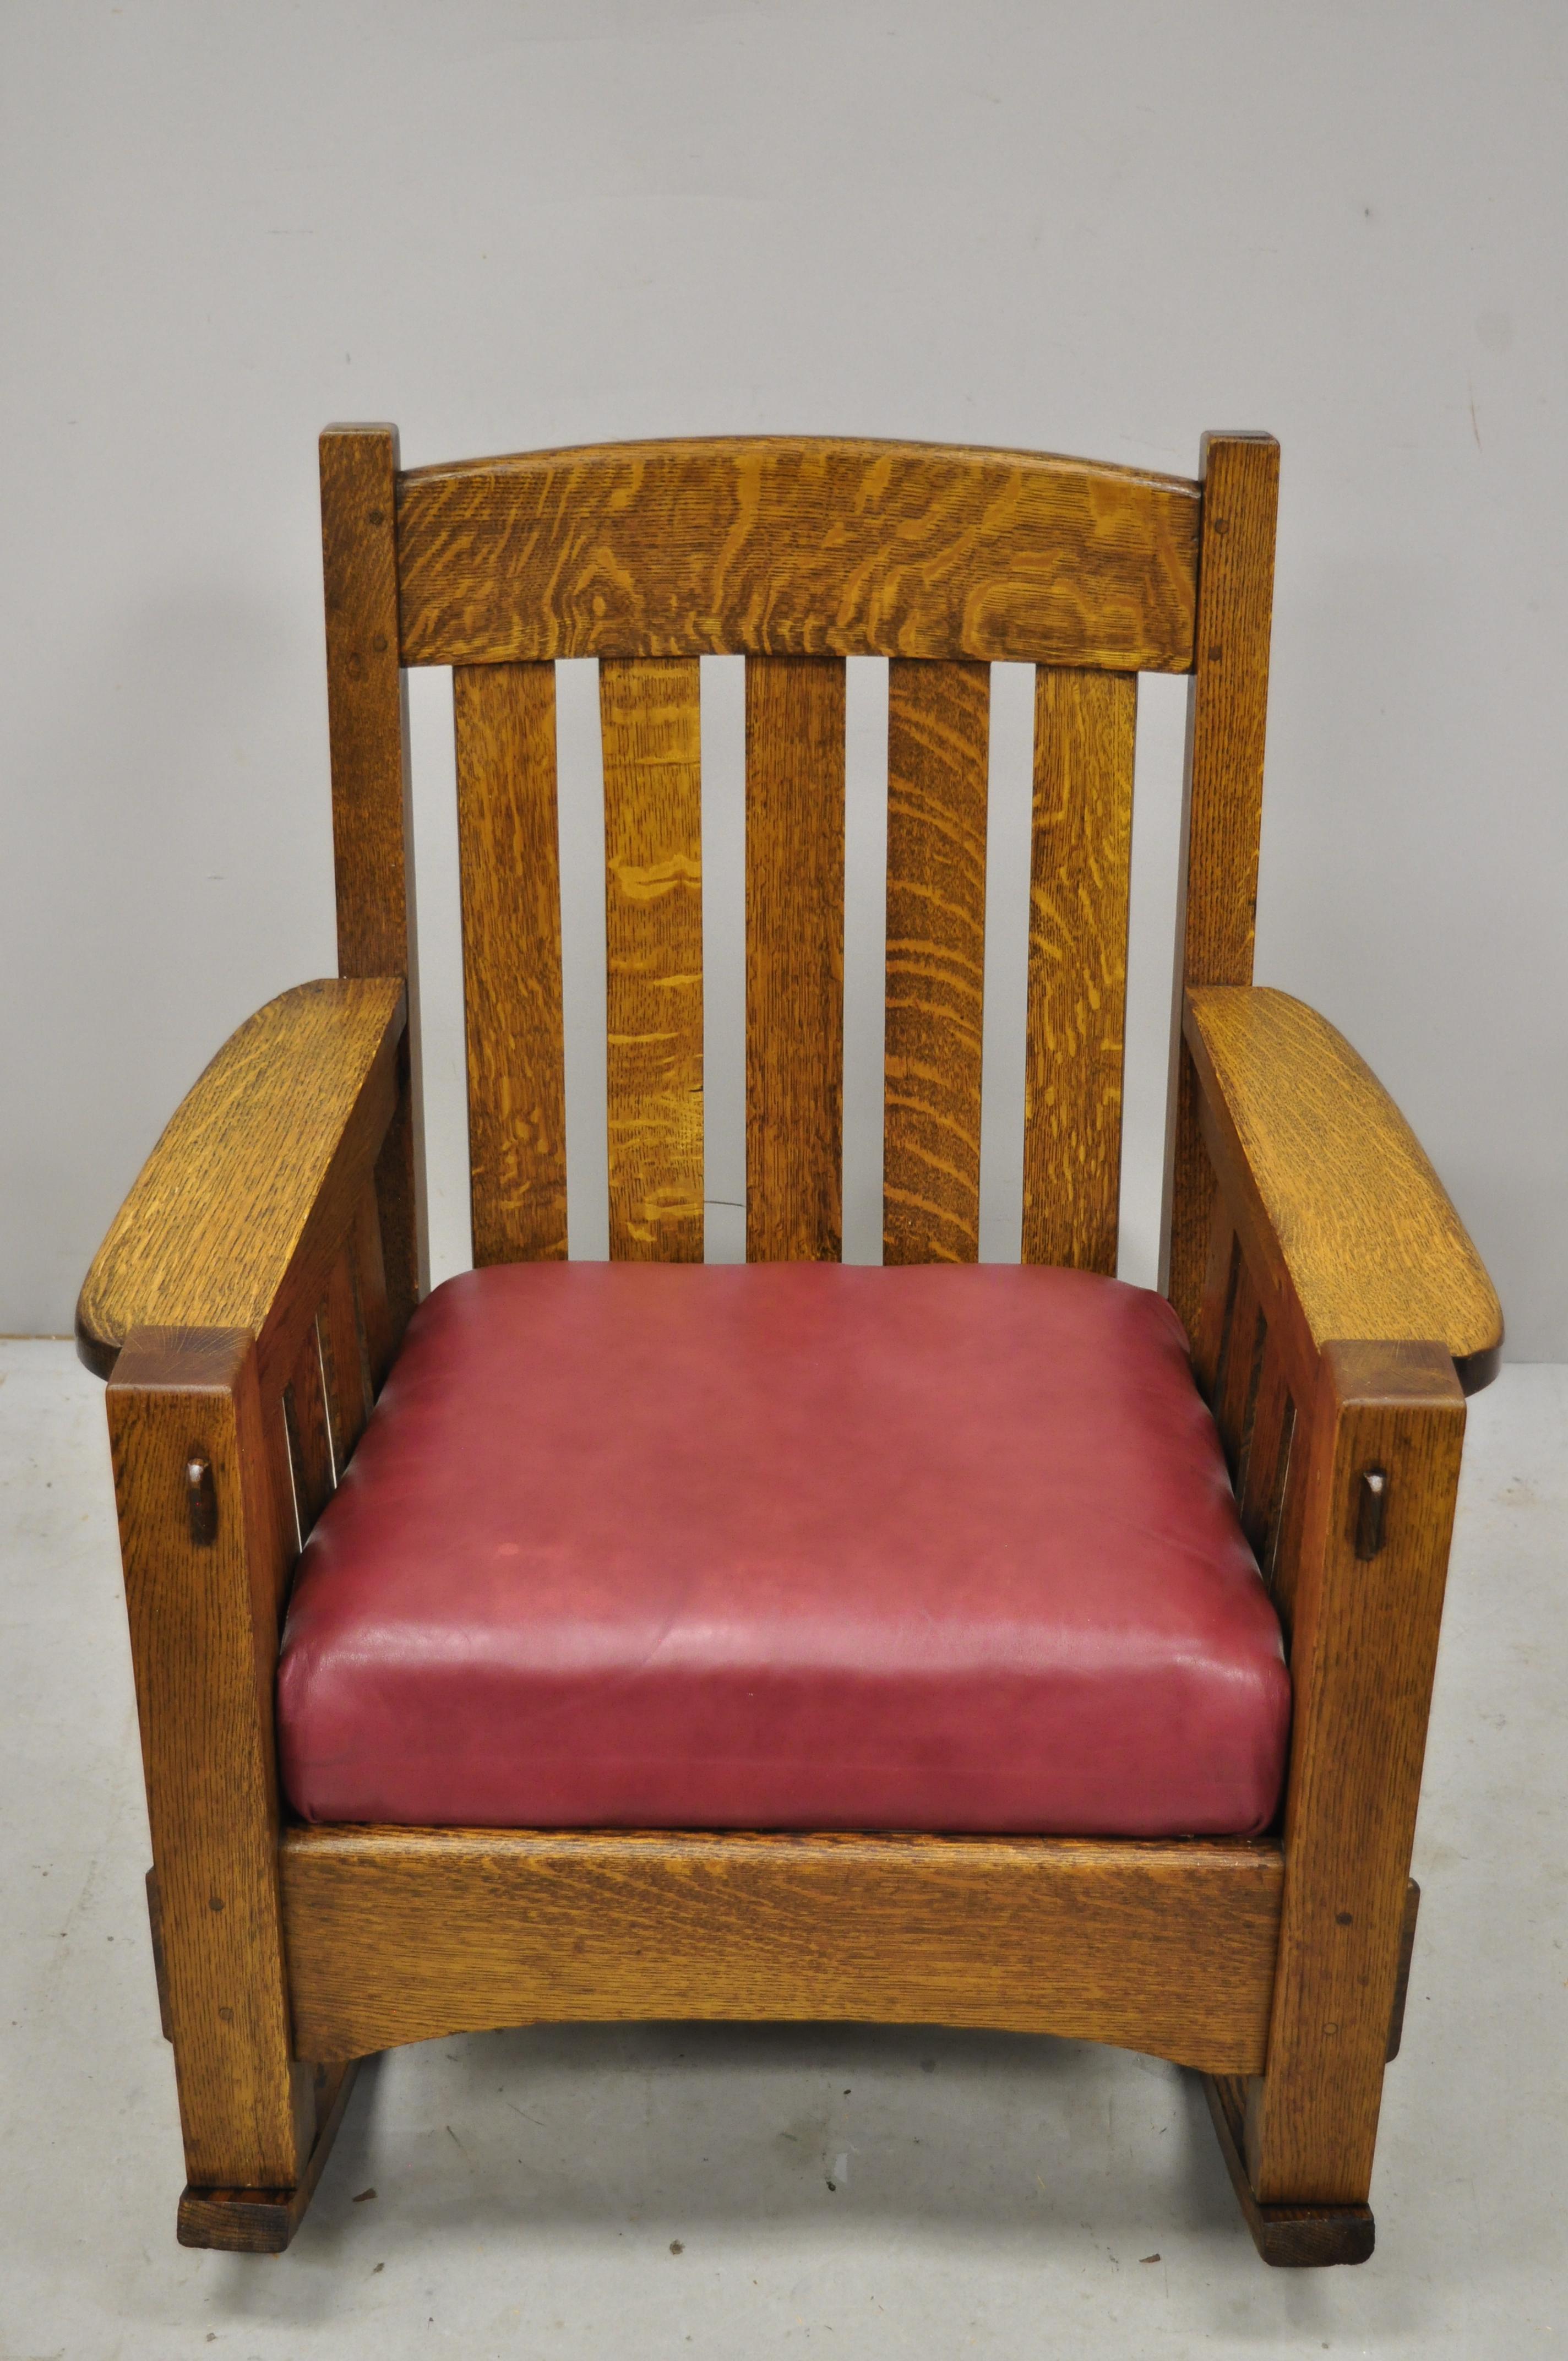 Antique Harden Mission oak Arts & Crafts rocking chair armchair in the Gustav Stickley style. Item features a solid wood frame, beautiful wood grain, leather seat, very nice antique item, quality American craftsmanship. Unmarked, but believed to be